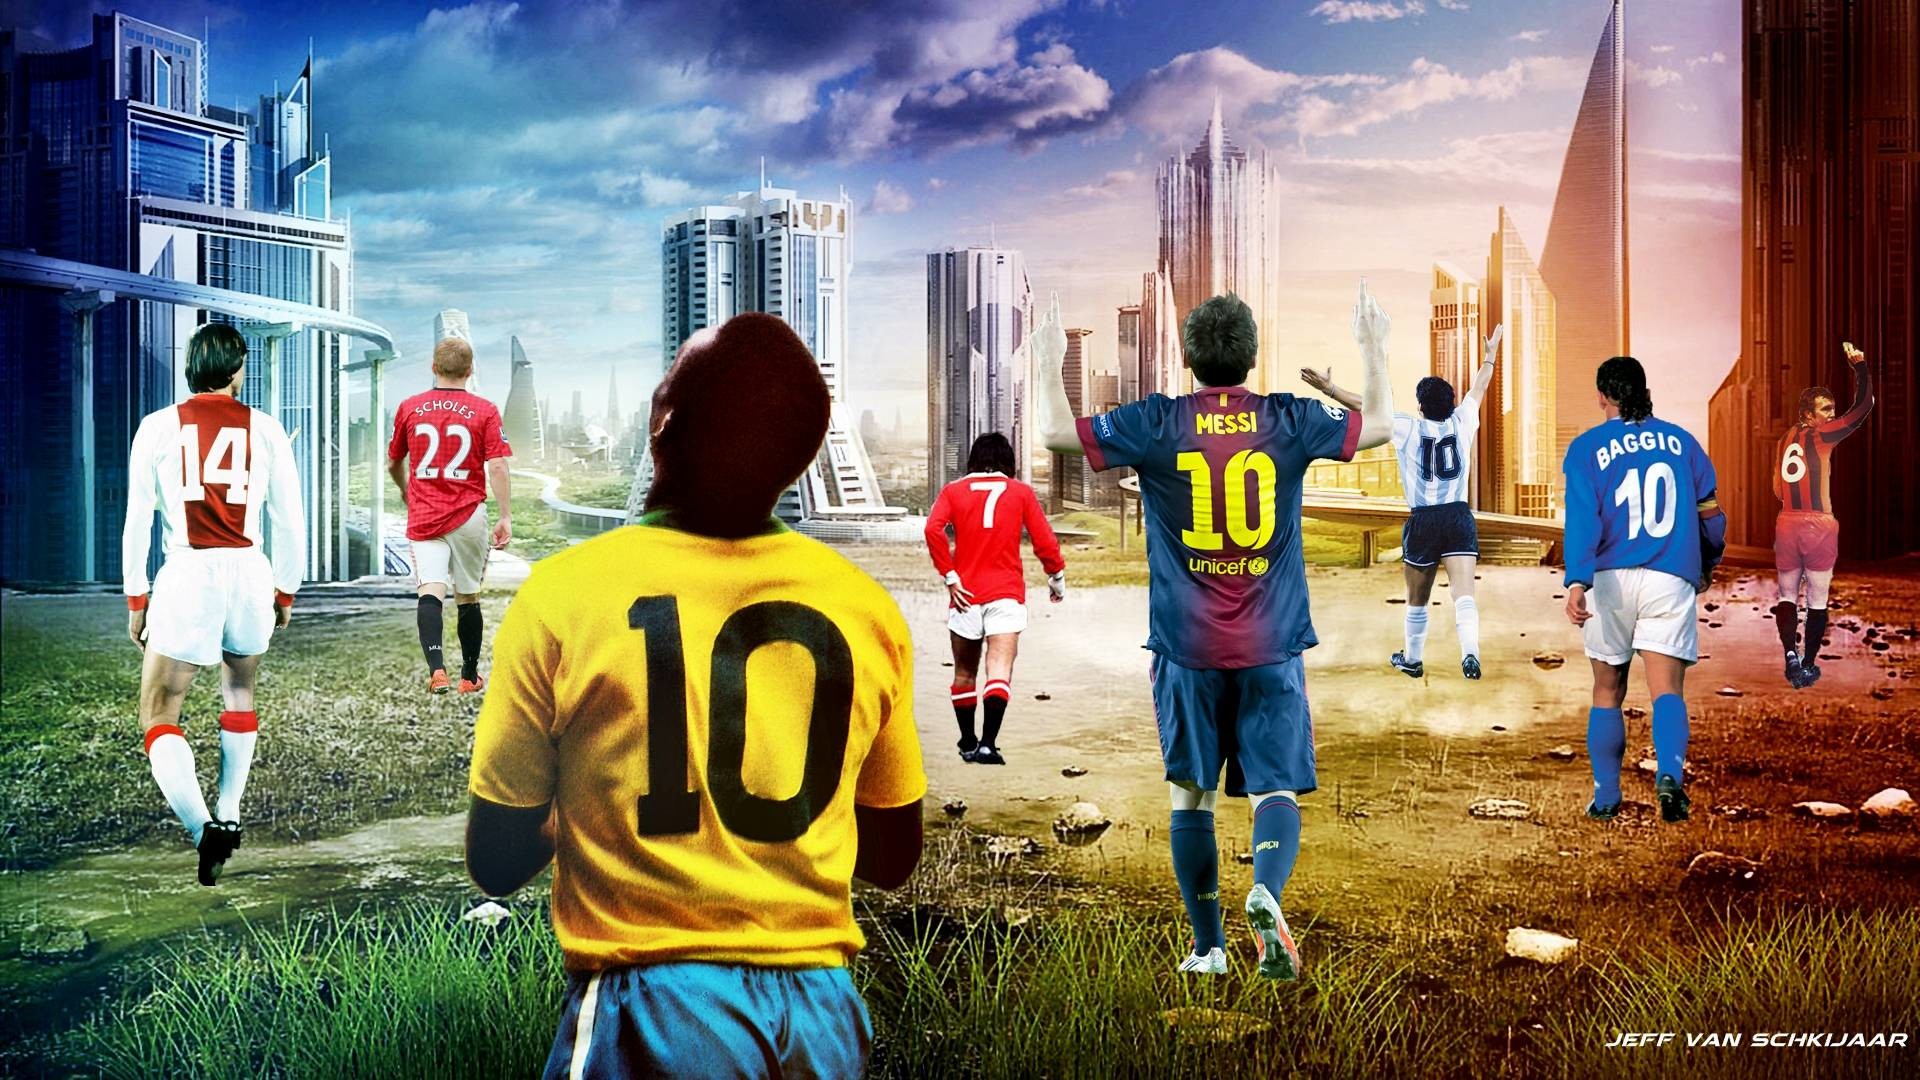 Best Football Players Of All Time Wallpaper by jeffery10 on DeviantArt